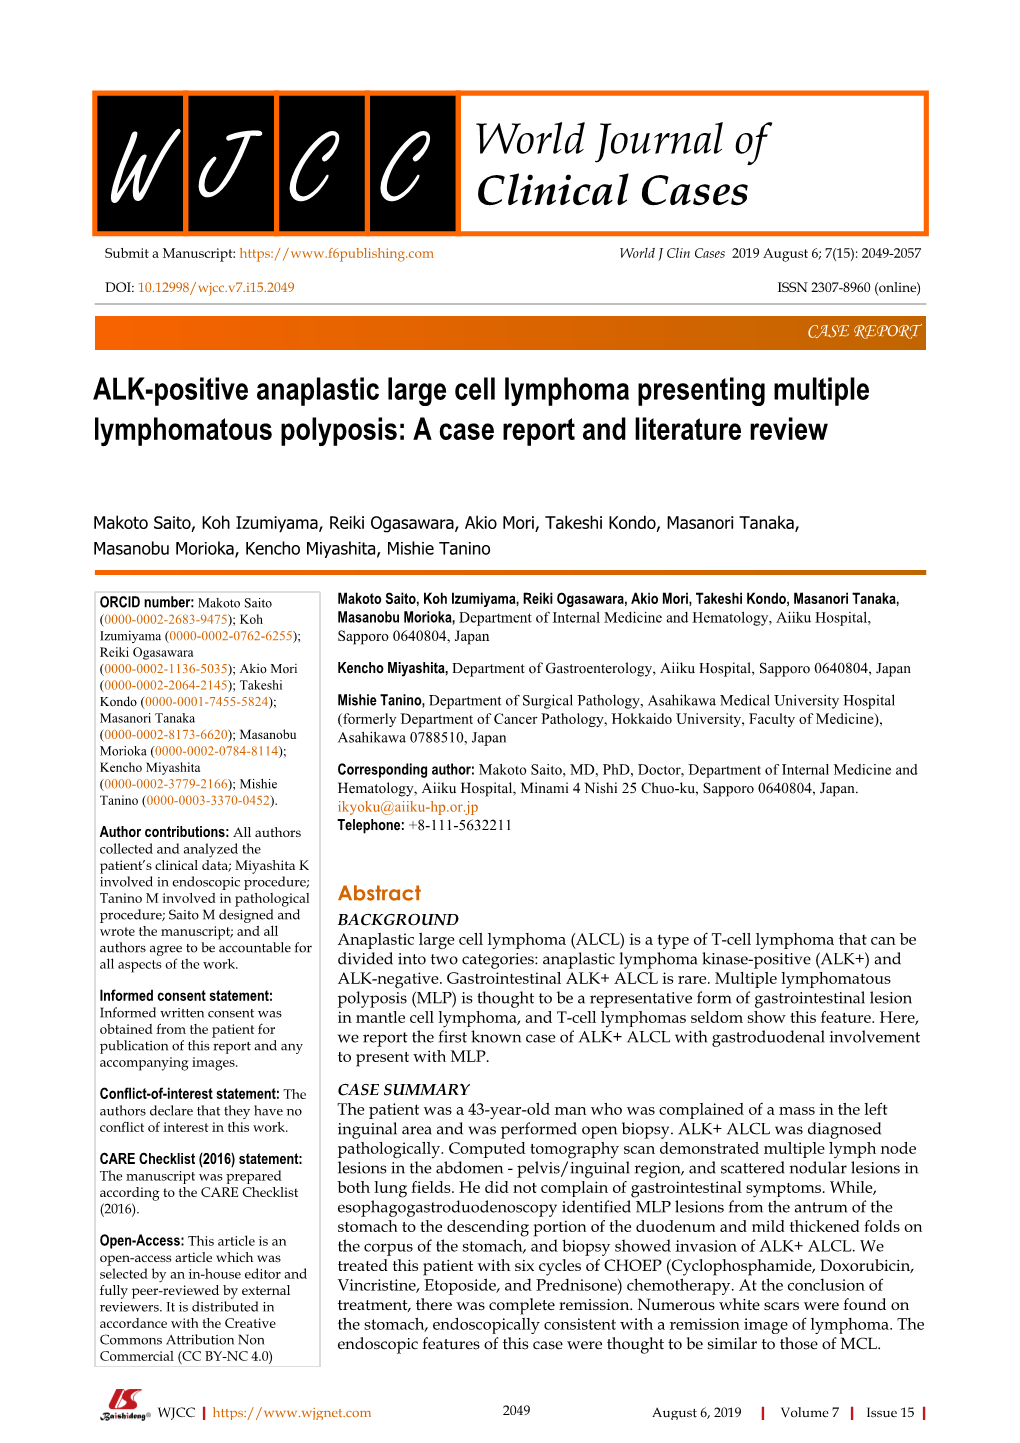 ALK-Positive Anaplastic Large Cell Lymphoma Presenting Multiple Lymphomatous Polyposis: a Case Report and Literature Review